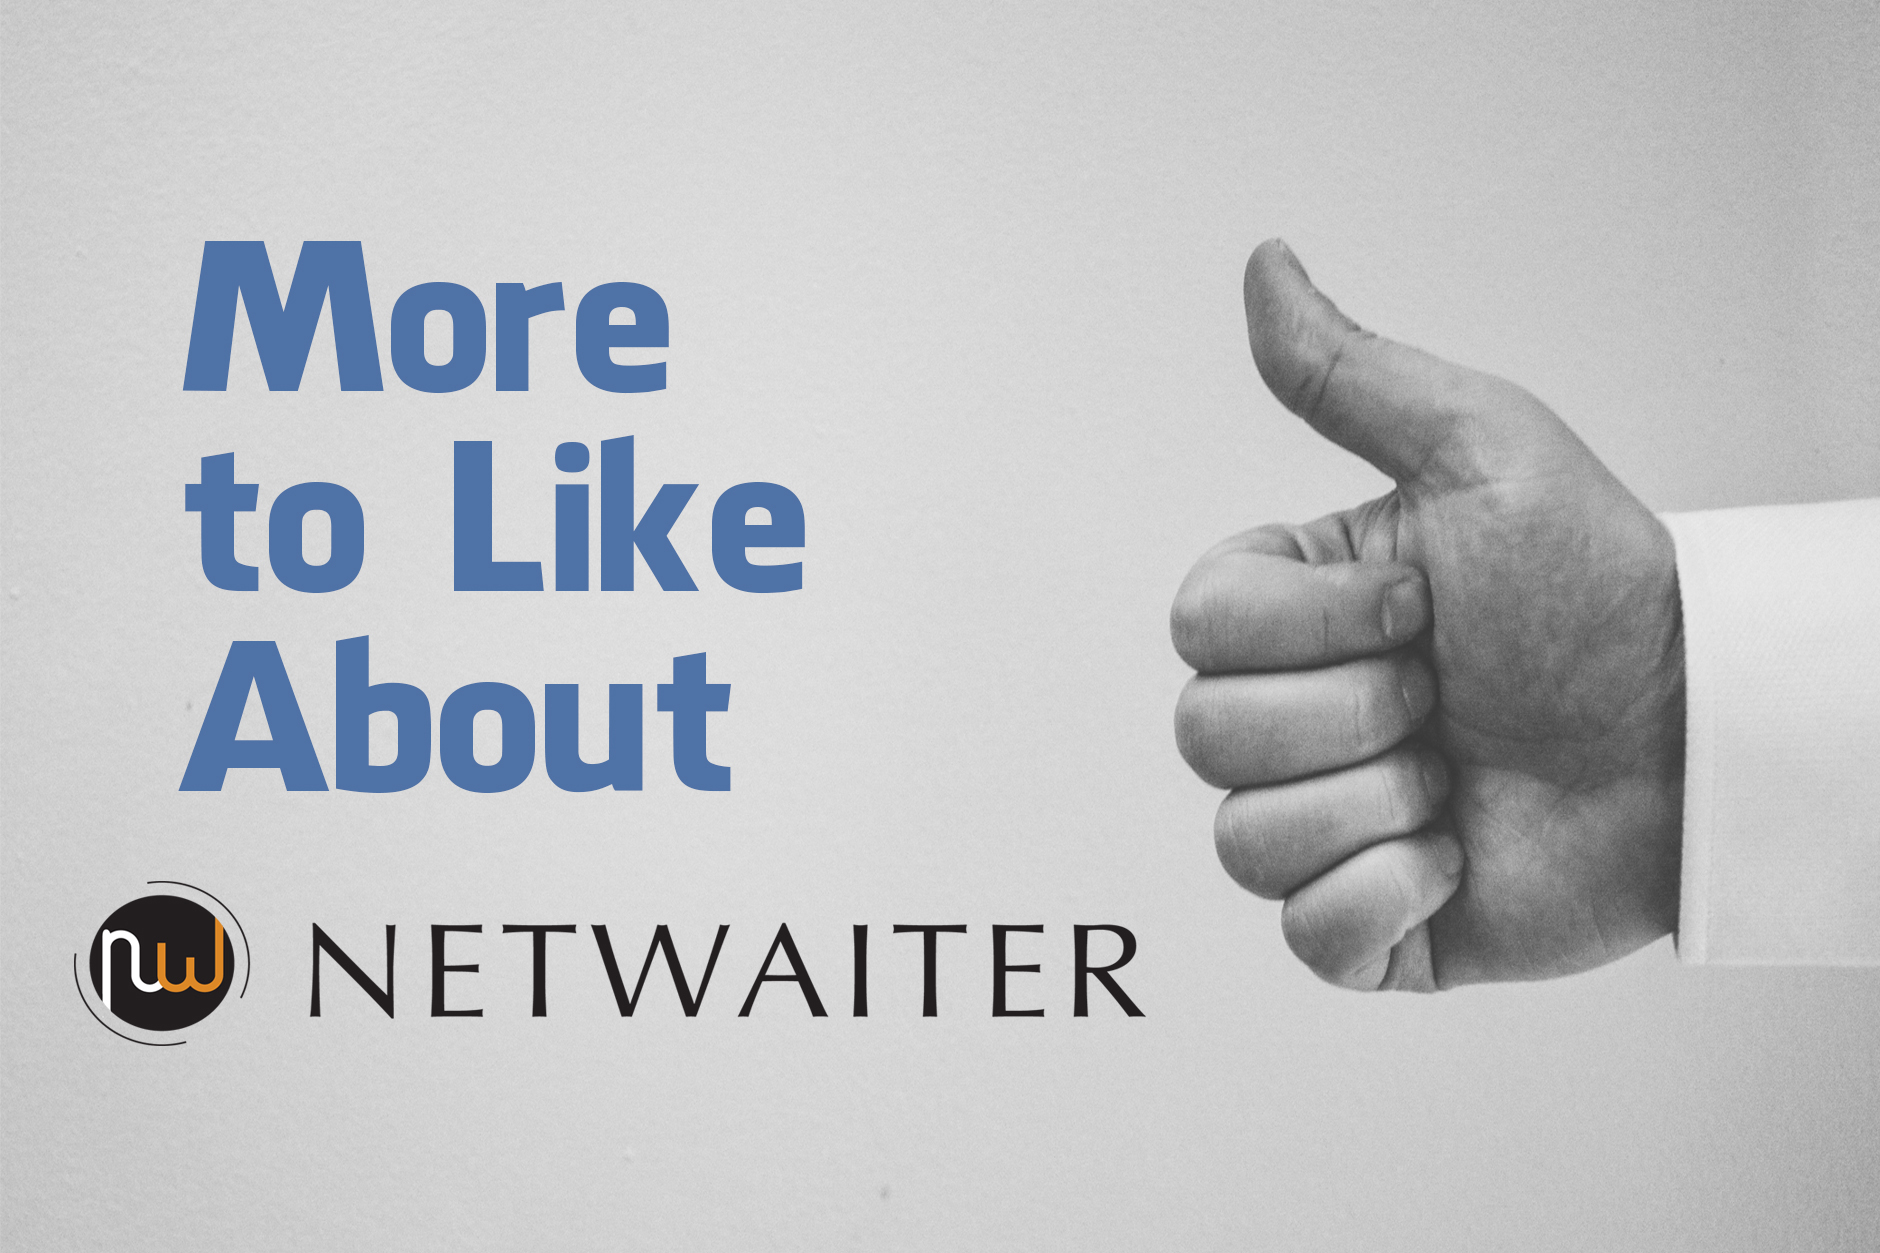 NetWaiter Broadcast Hub: More to Like About NetWaiter